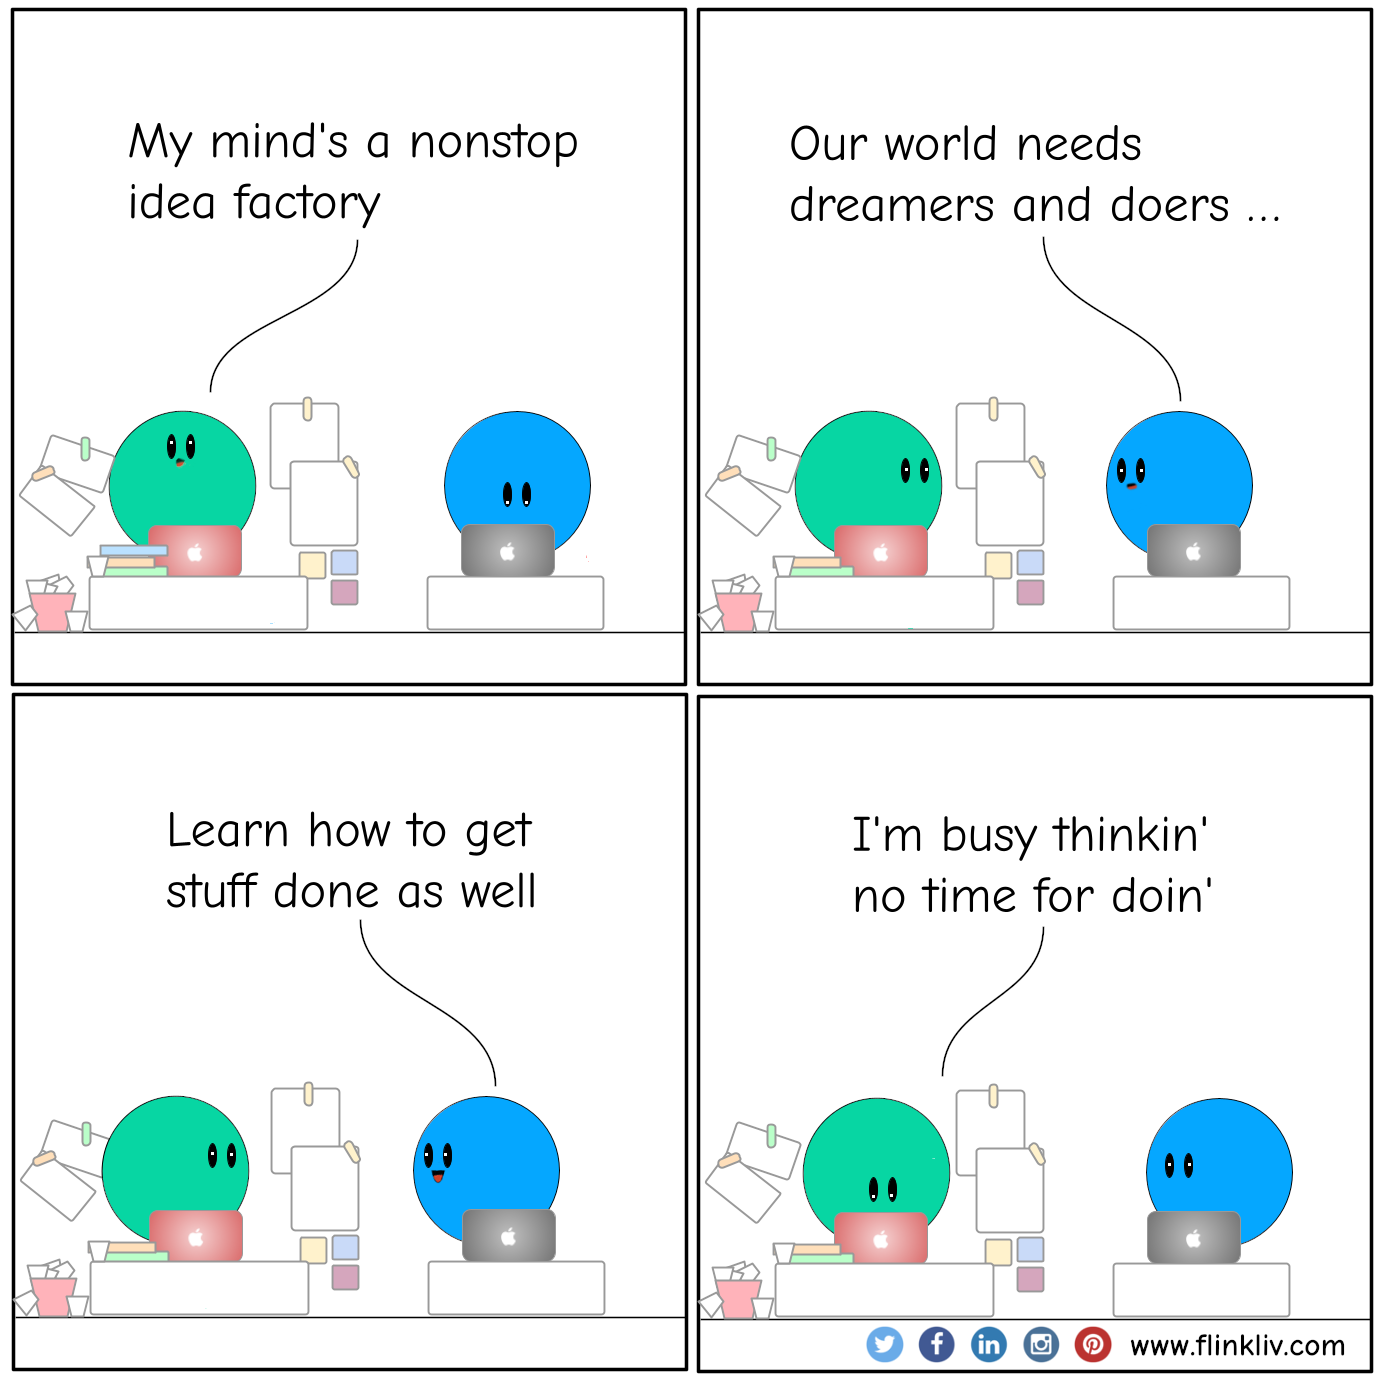  Conversation between A and B about our world needs dreamers and doers; learn how to get stuff done as well
				A: My mind's a nonstop idea factory
				B: Our world needs dreamers and doers; learn how to get stuff done as well
				A: I'm busy thinkin' no need for doin'
              